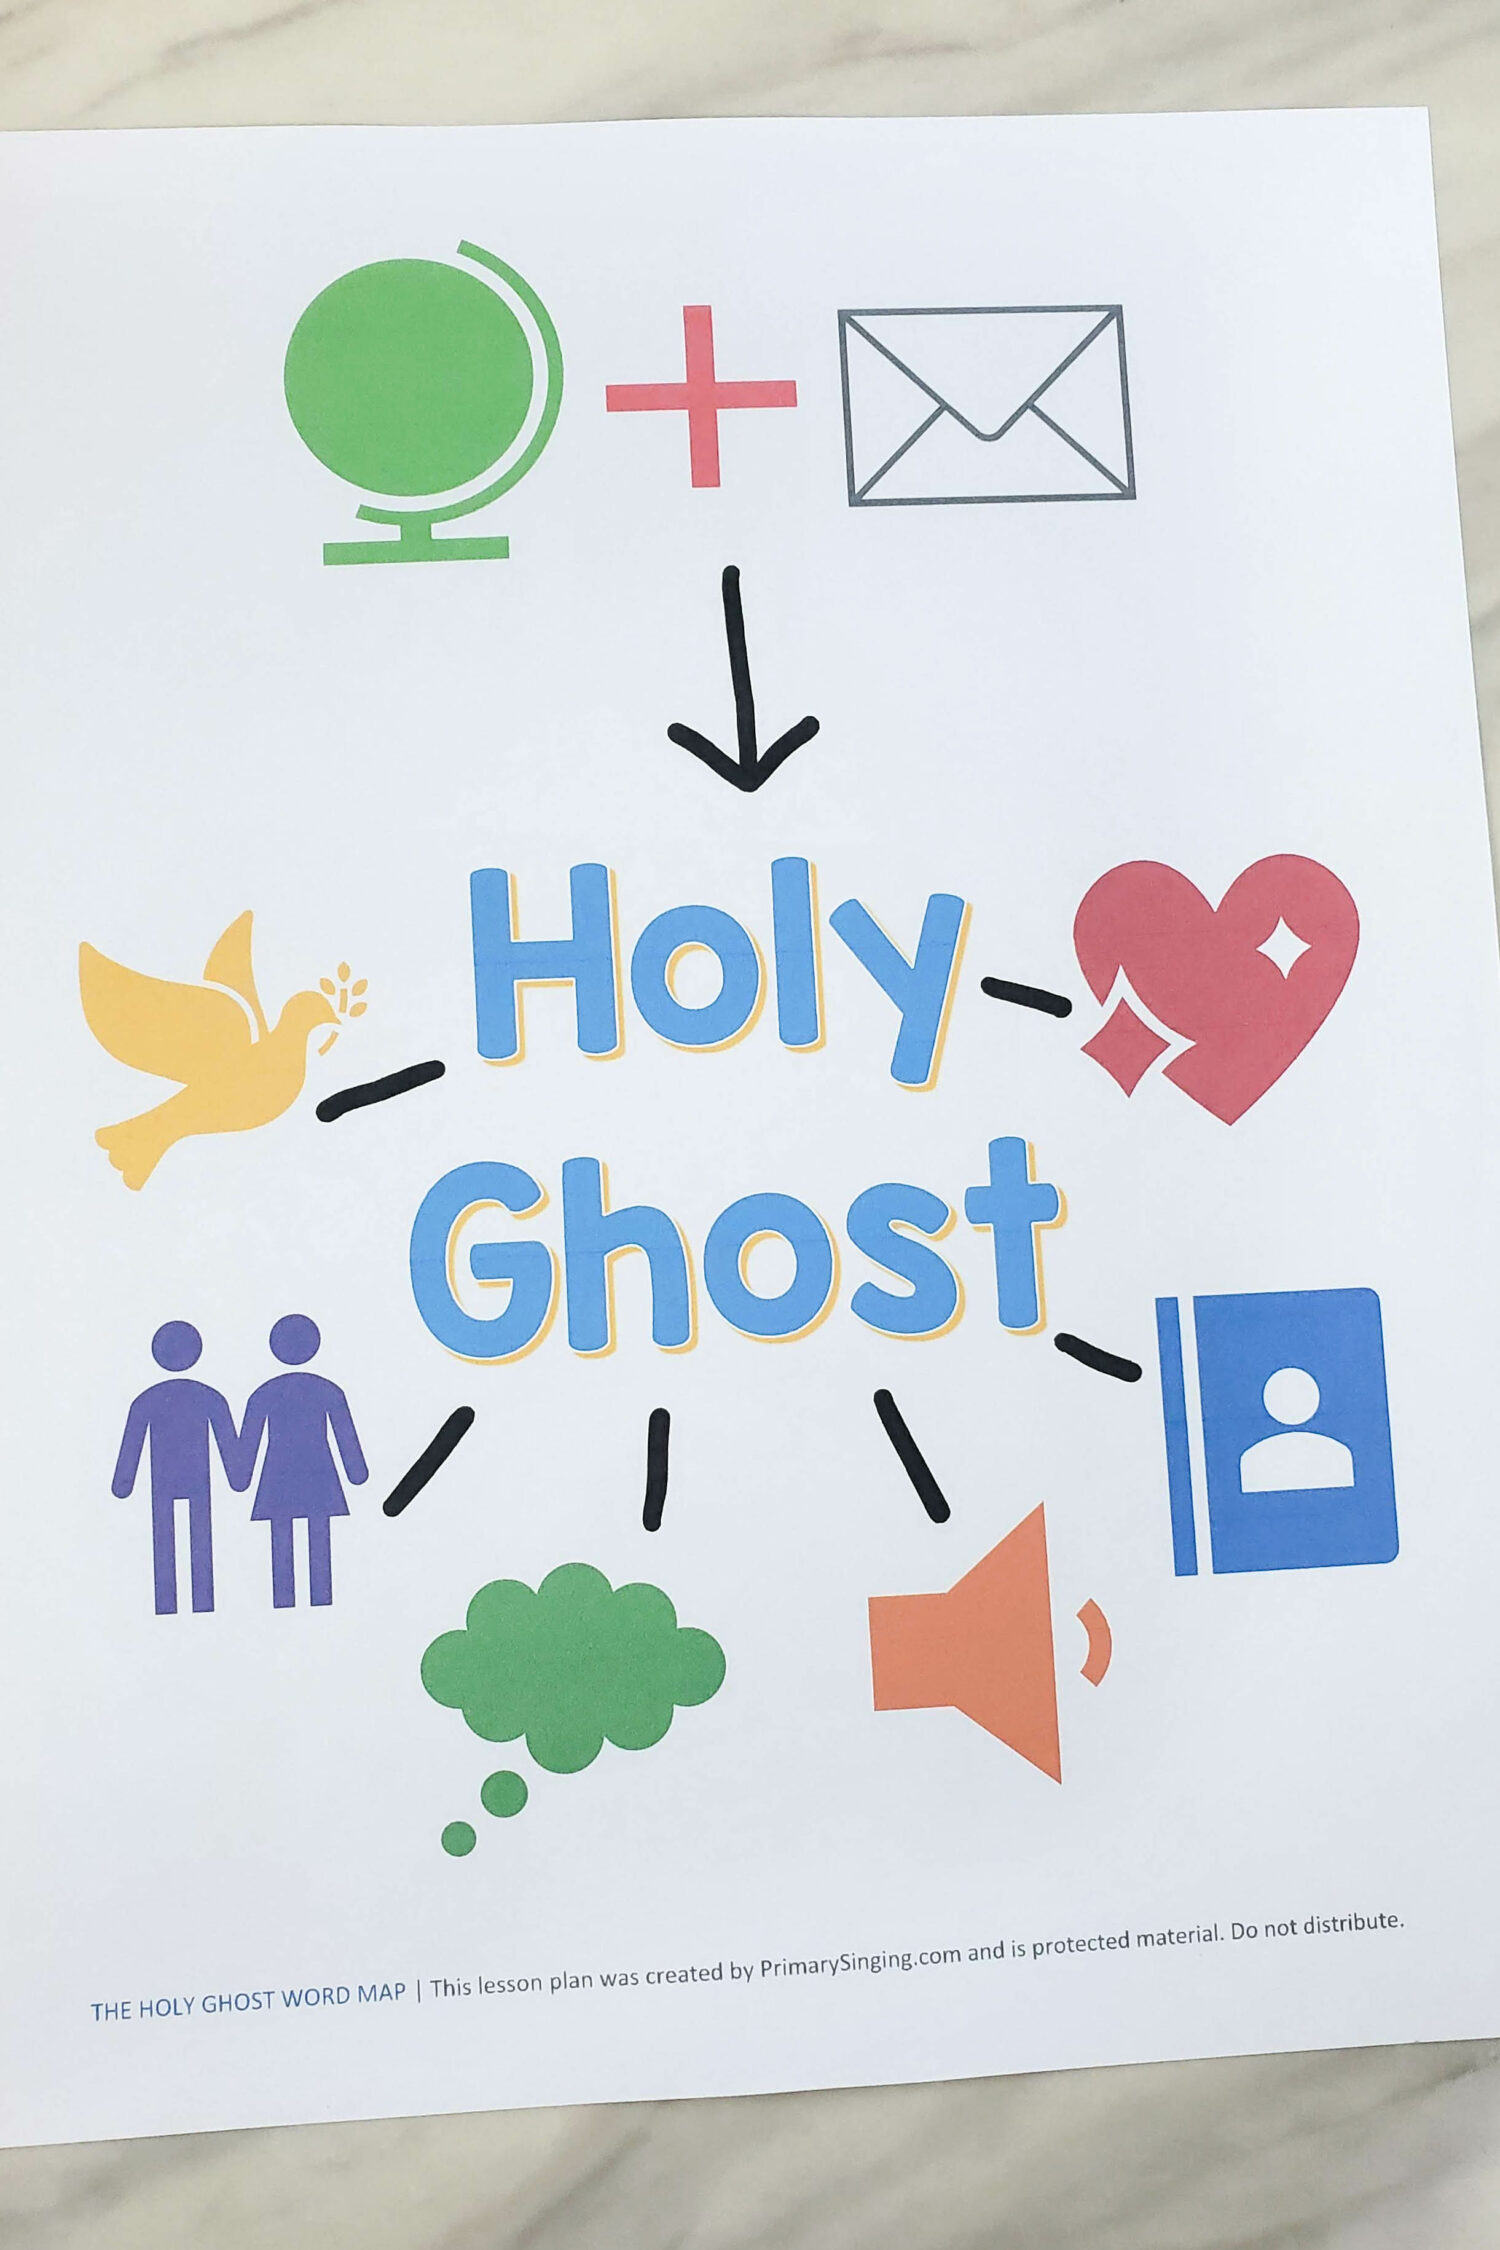 The Holy Ghost Word Map singing time idea - fun and engaging way to teach this song the first time line by line using a visual representation of the lyrics that teach the core message of this song. Includes printable song helps for LDS Primary music leaders.